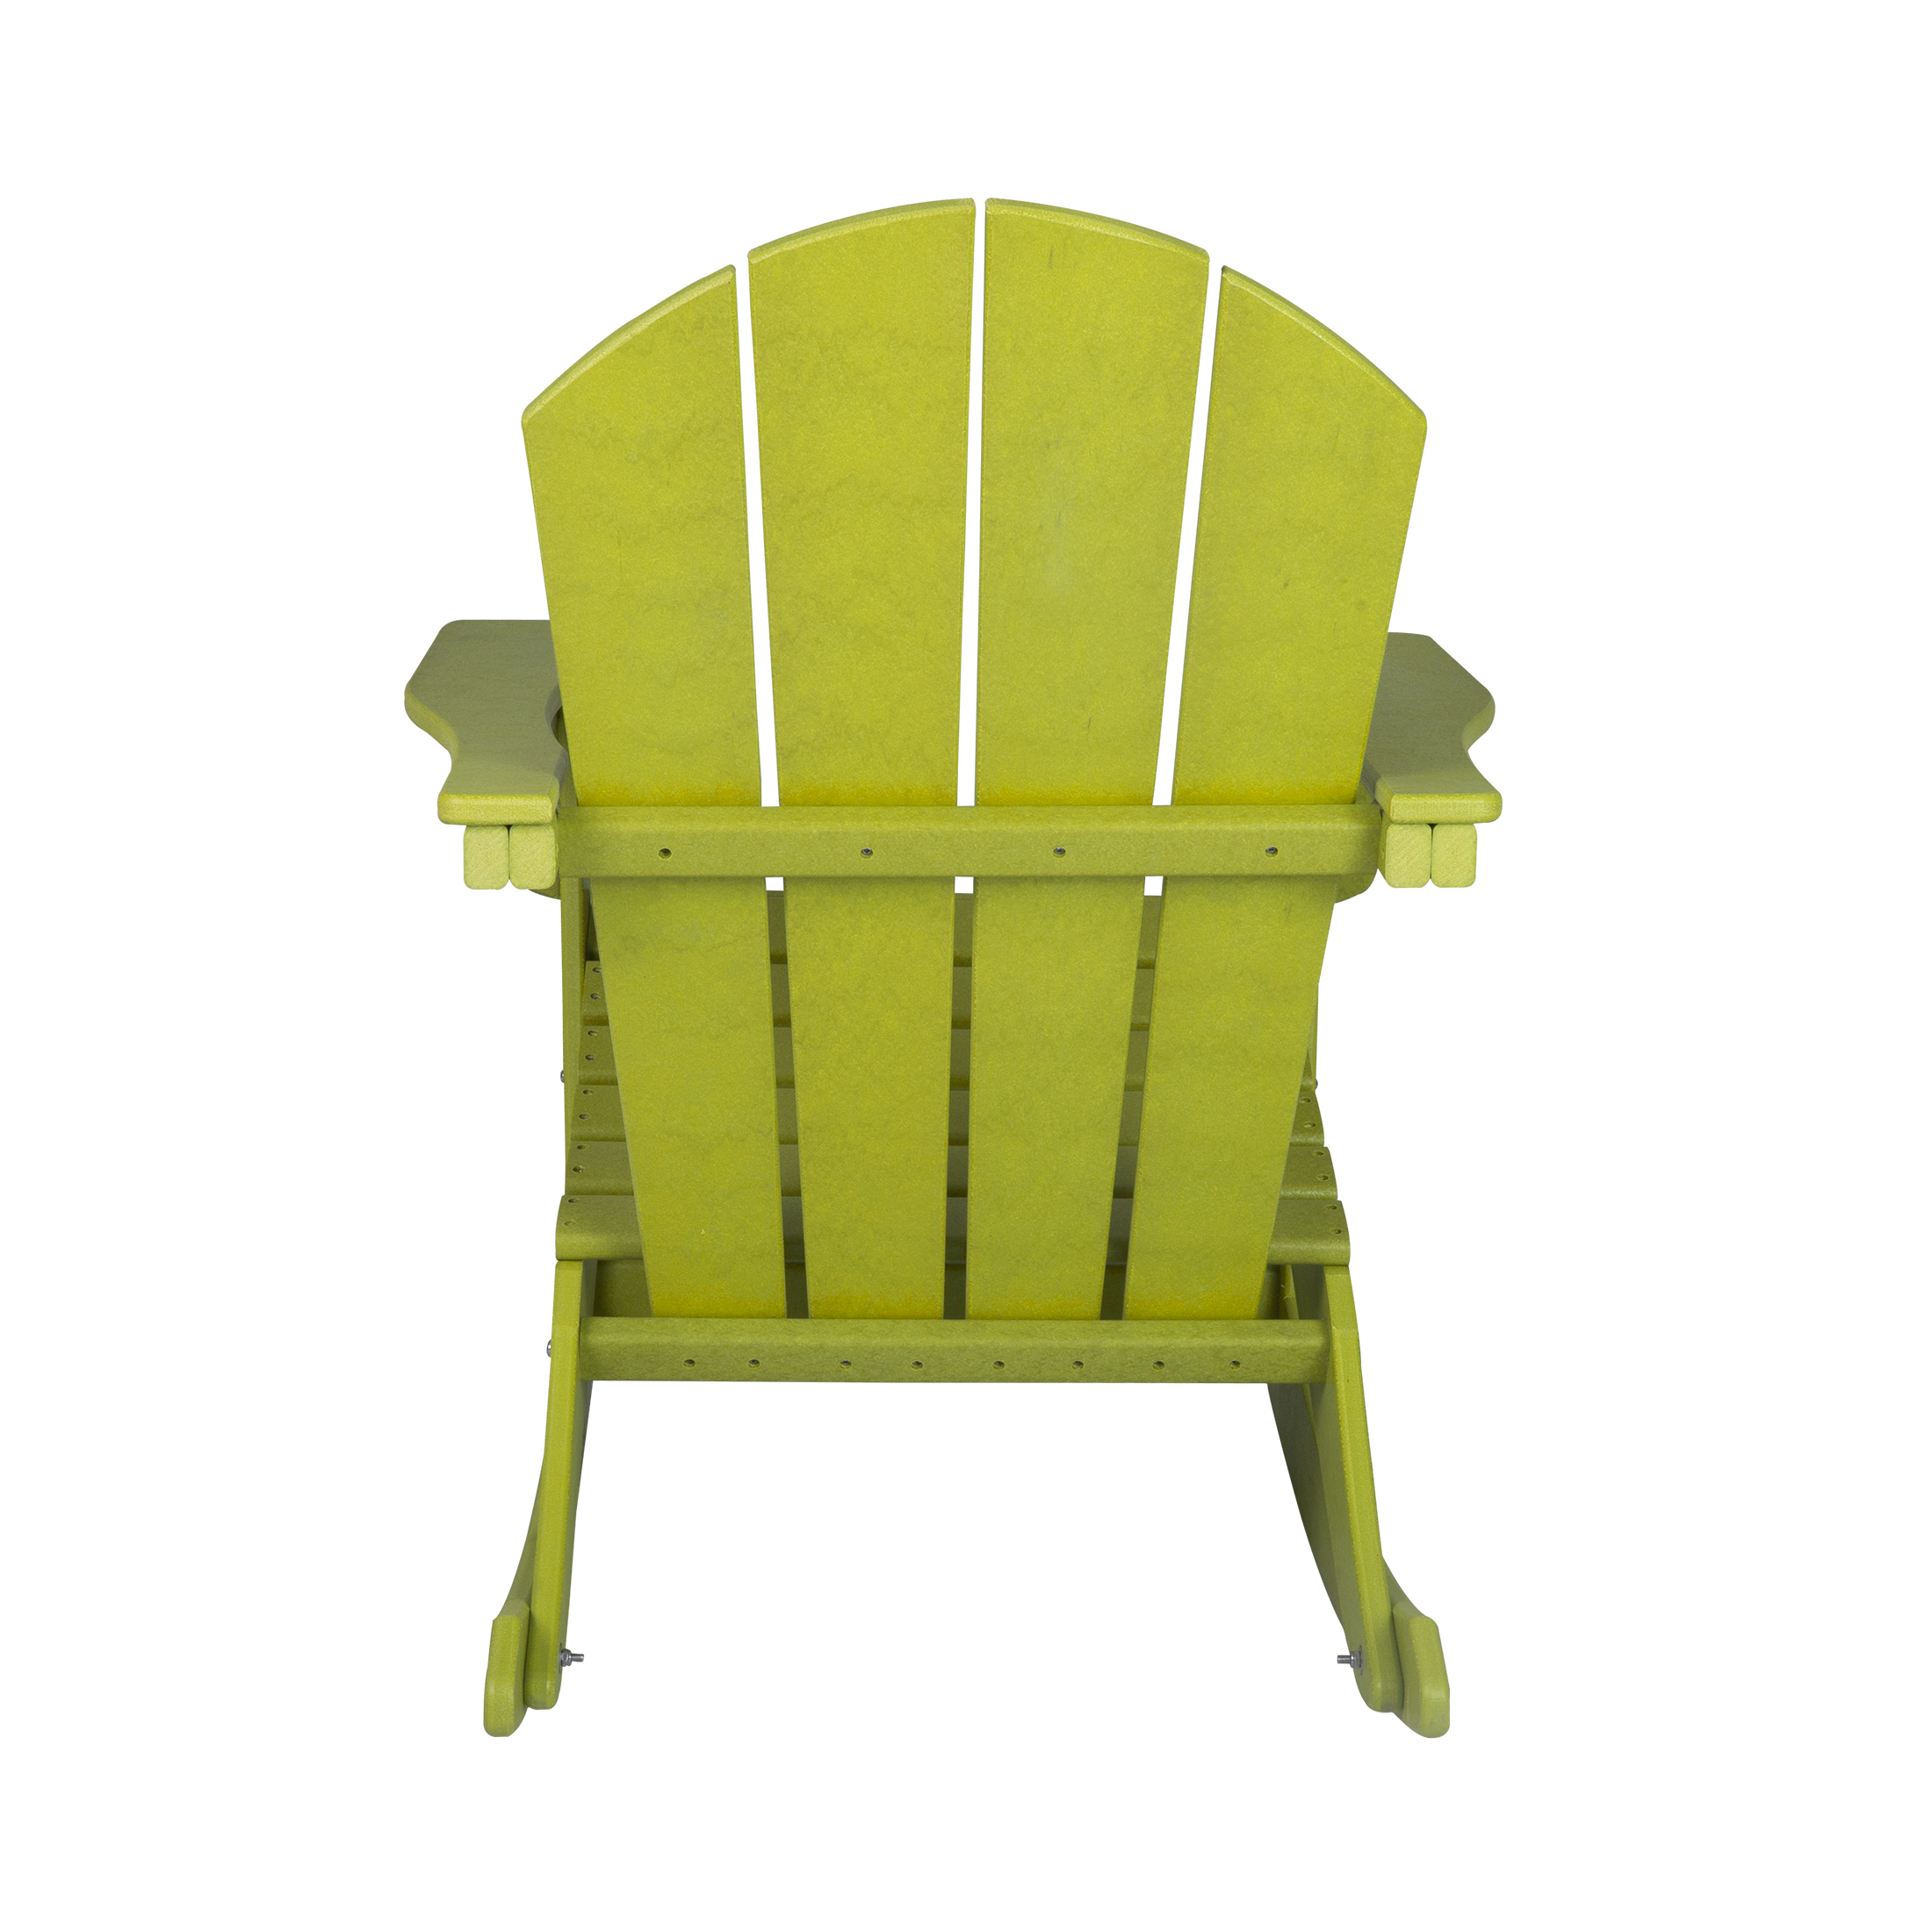 GARDEN Plastic Adirondack Rocking Chair for Outdoor Patio Porch Seating, Lime - image 2 of 7